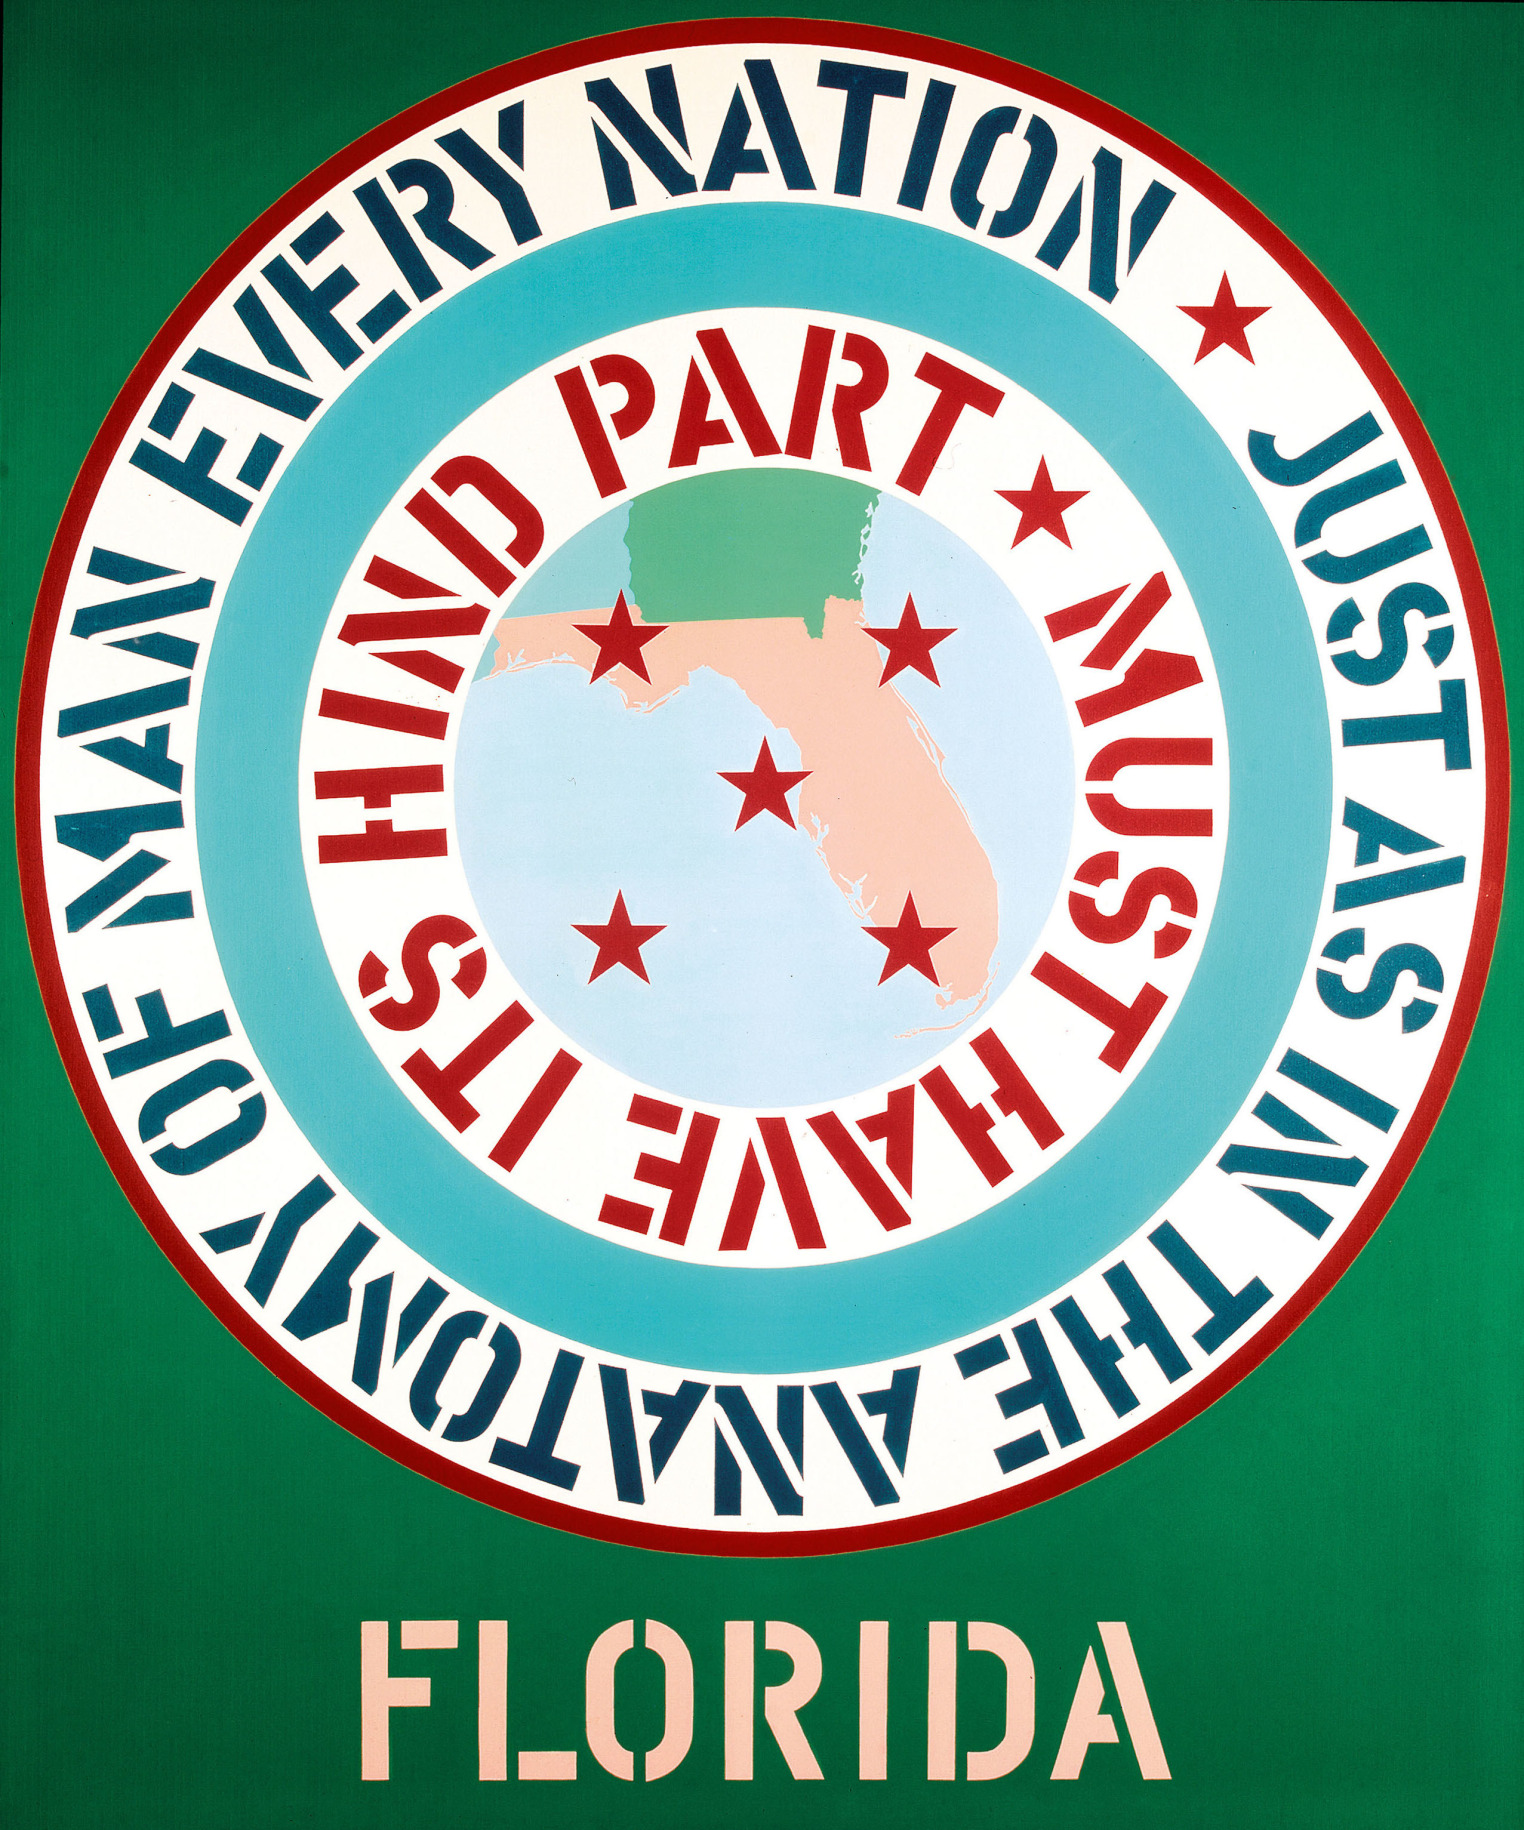 A 70 by 60 inch dark canvas with the title, Florida, painted in pink stenciled letters across the center bottom edge of the painting. Above the title and dominating the canvas is a large circle consisting of a pink image of the state of Florida in the center. Around this image is a white ring with stenciled red text surrounded by a blue ring and another white ring with blue stenciled text. The text reads, starting in the outer ring, &quot;Just as in the anatomy of man every nation,&quot; and in the inner ring &quot;must have its hind part.&quot;